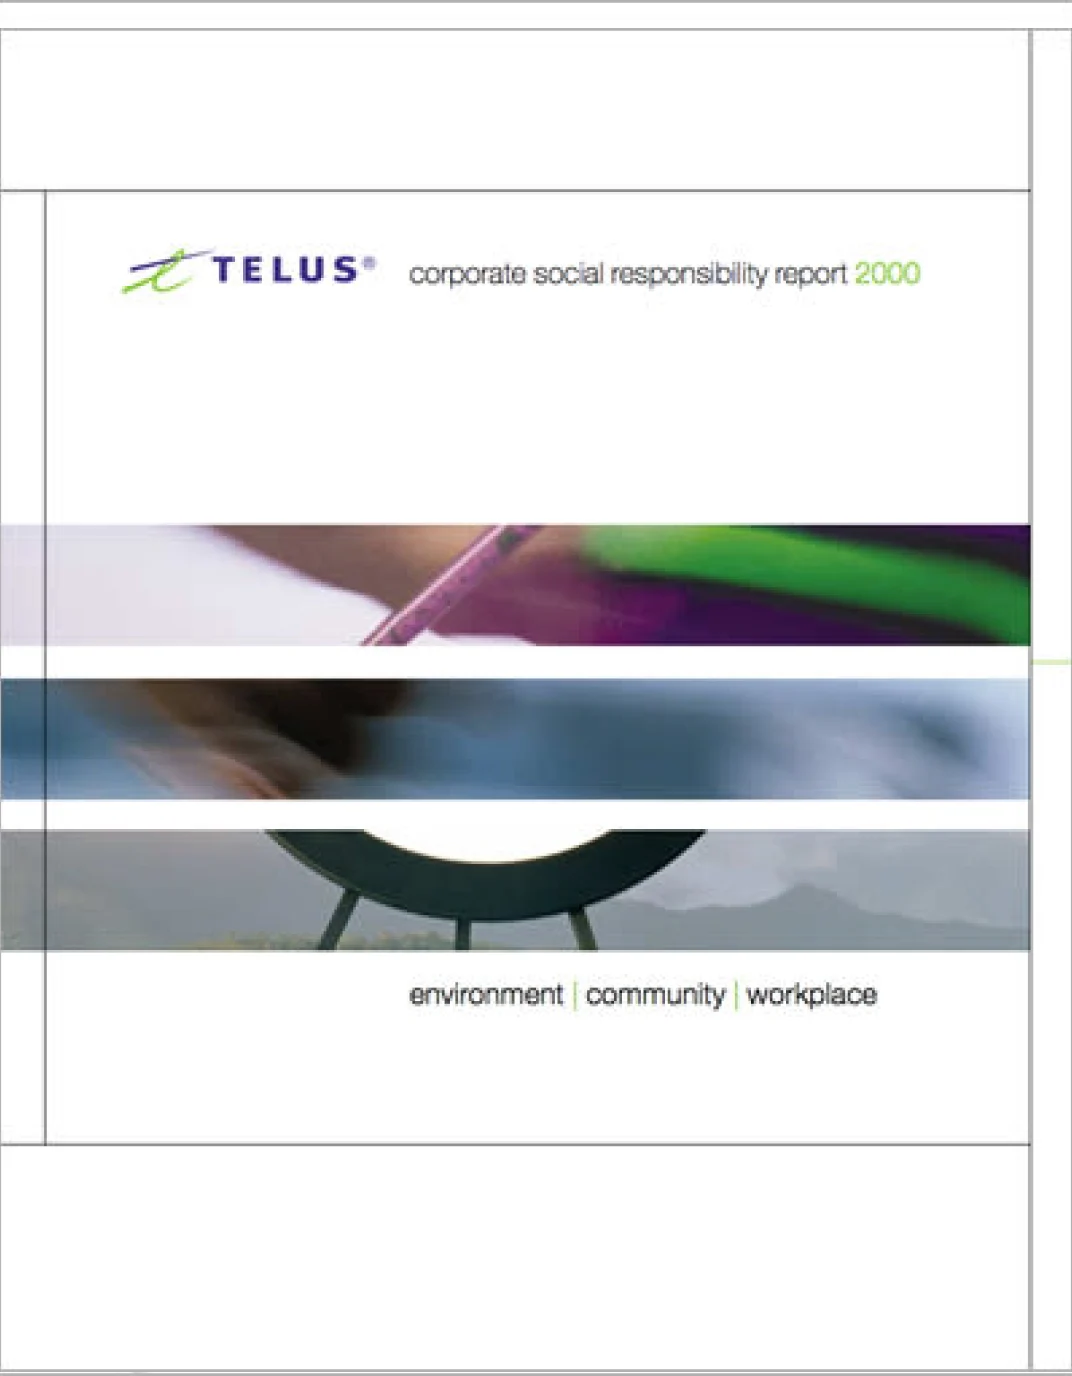 The cover of the 2000 TELUS Sustainability Report